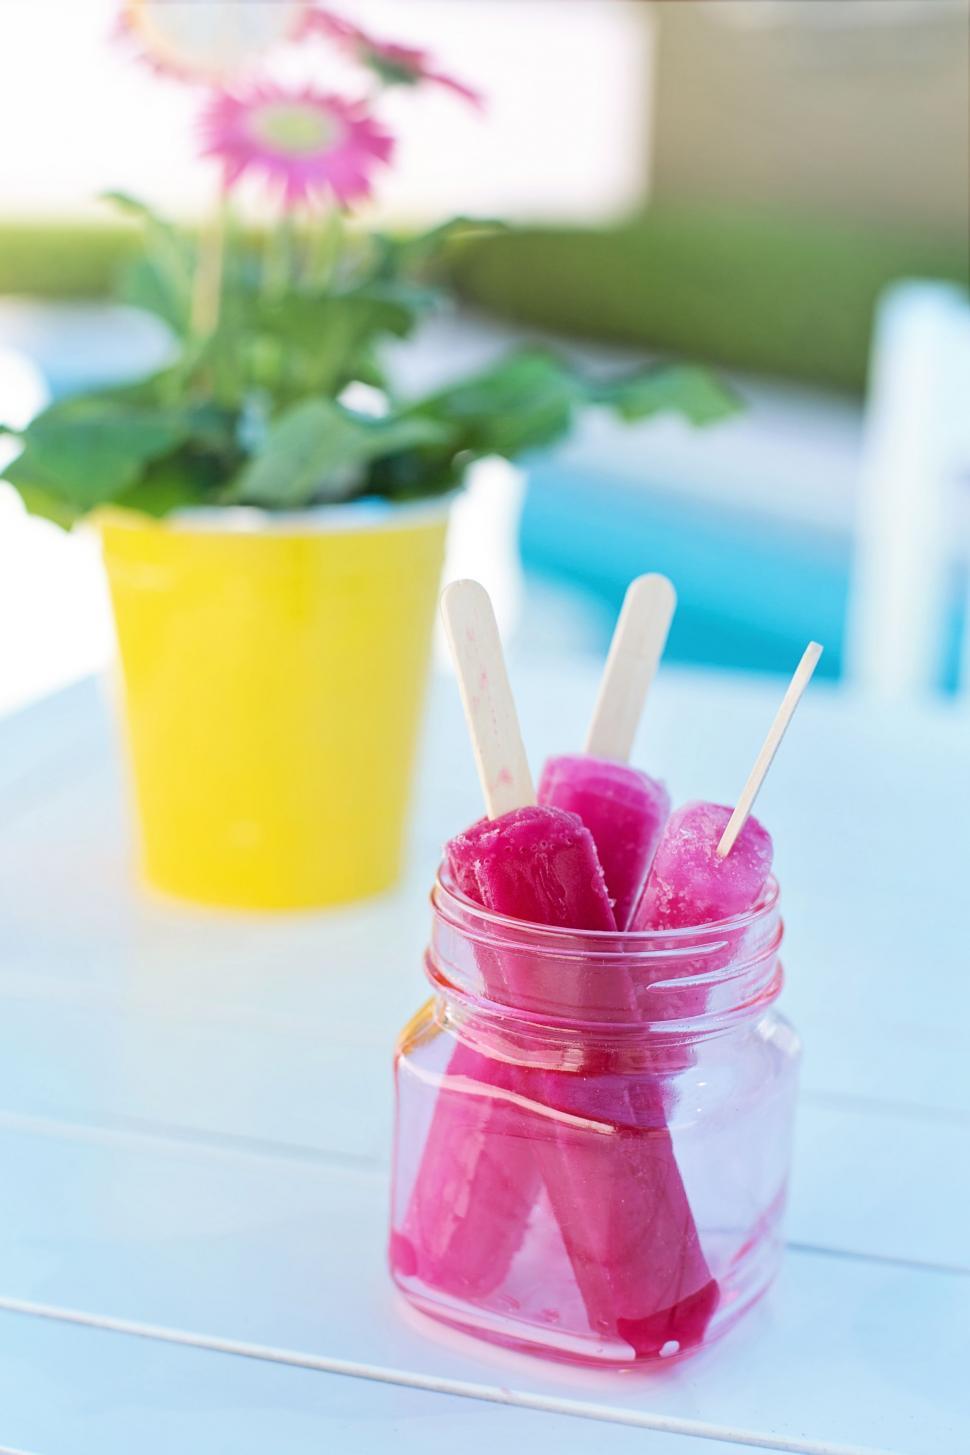 Free Image of Pink Popsicles 